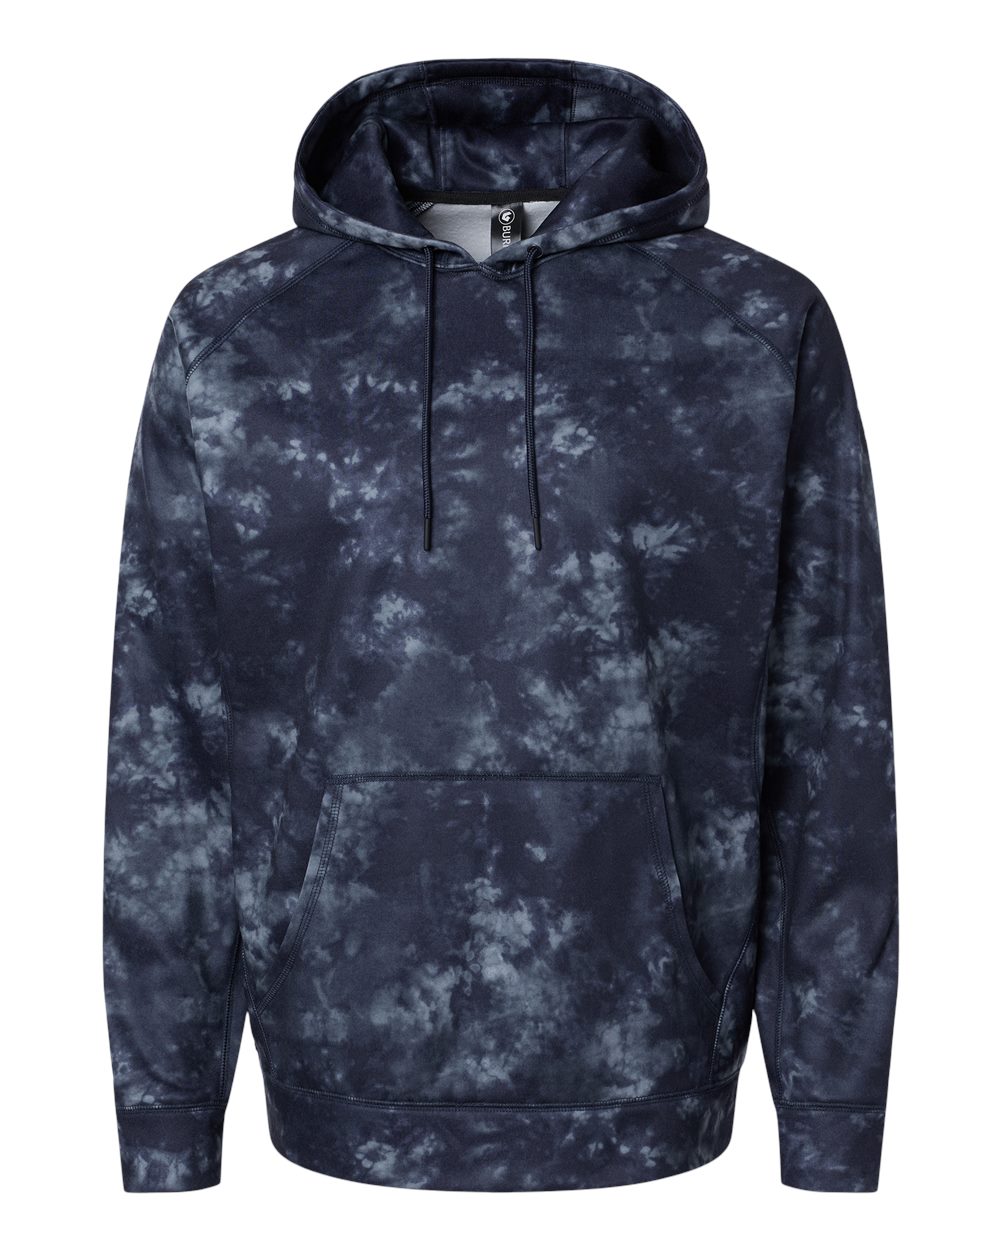 click to view Navy Tie Dye